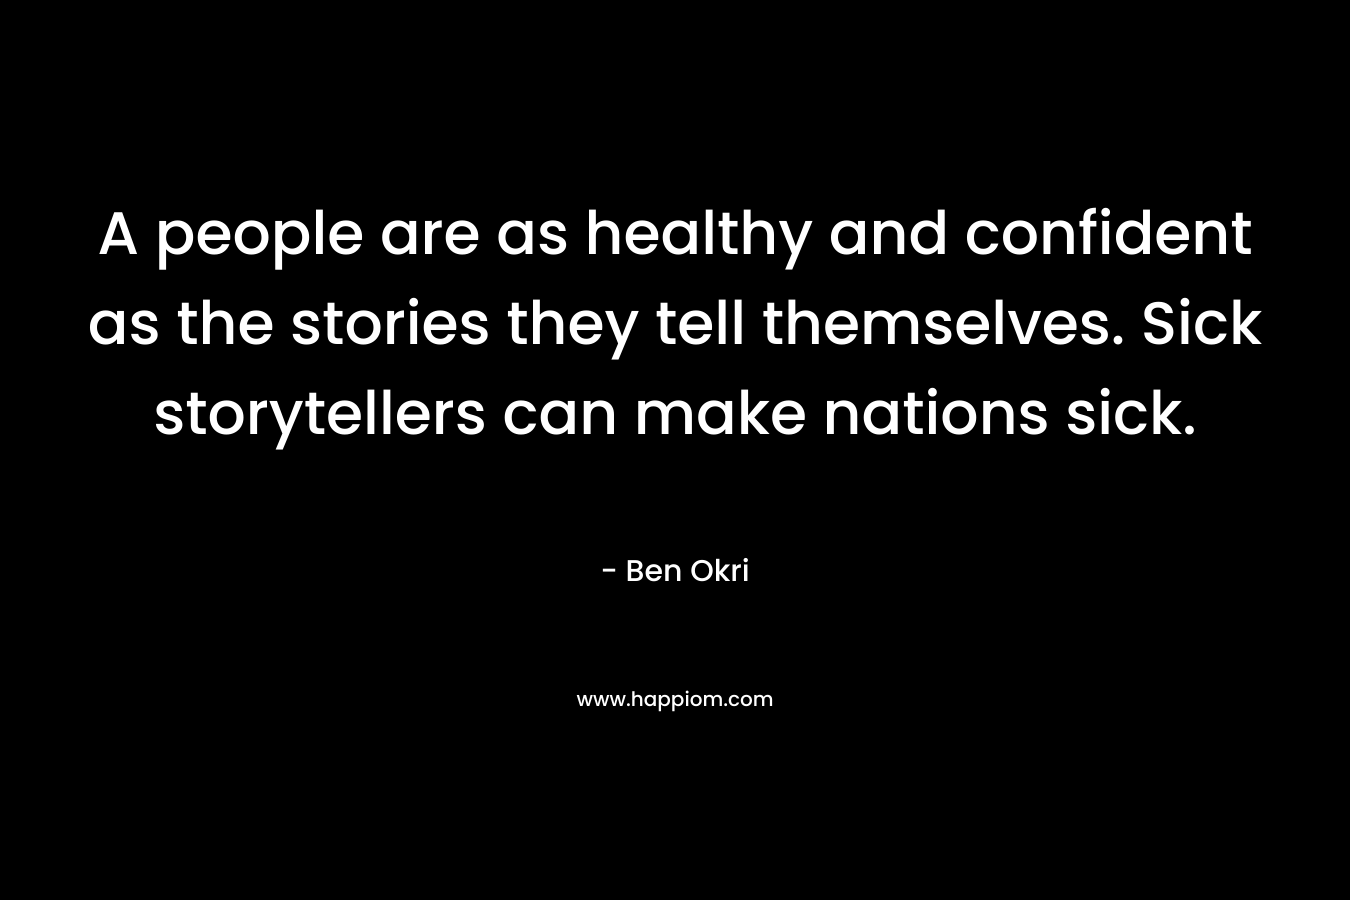 A people are as healthy and confident as the stories they tell themselves. Sick storytellers can make nations sick.